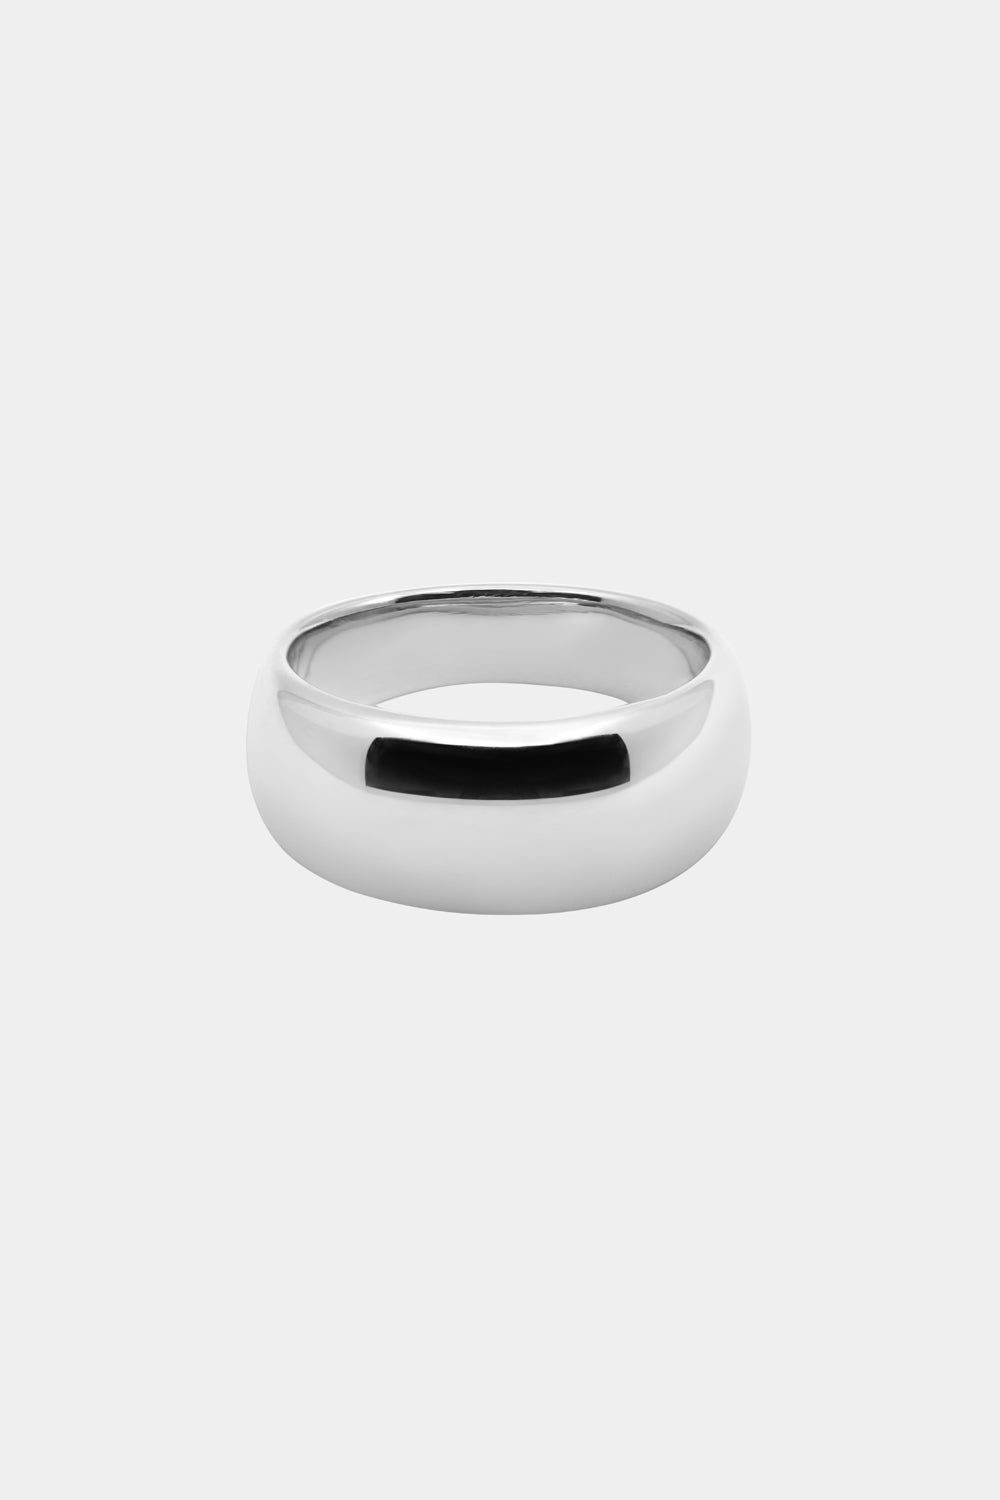 Blob Ring | Silver or White Gold